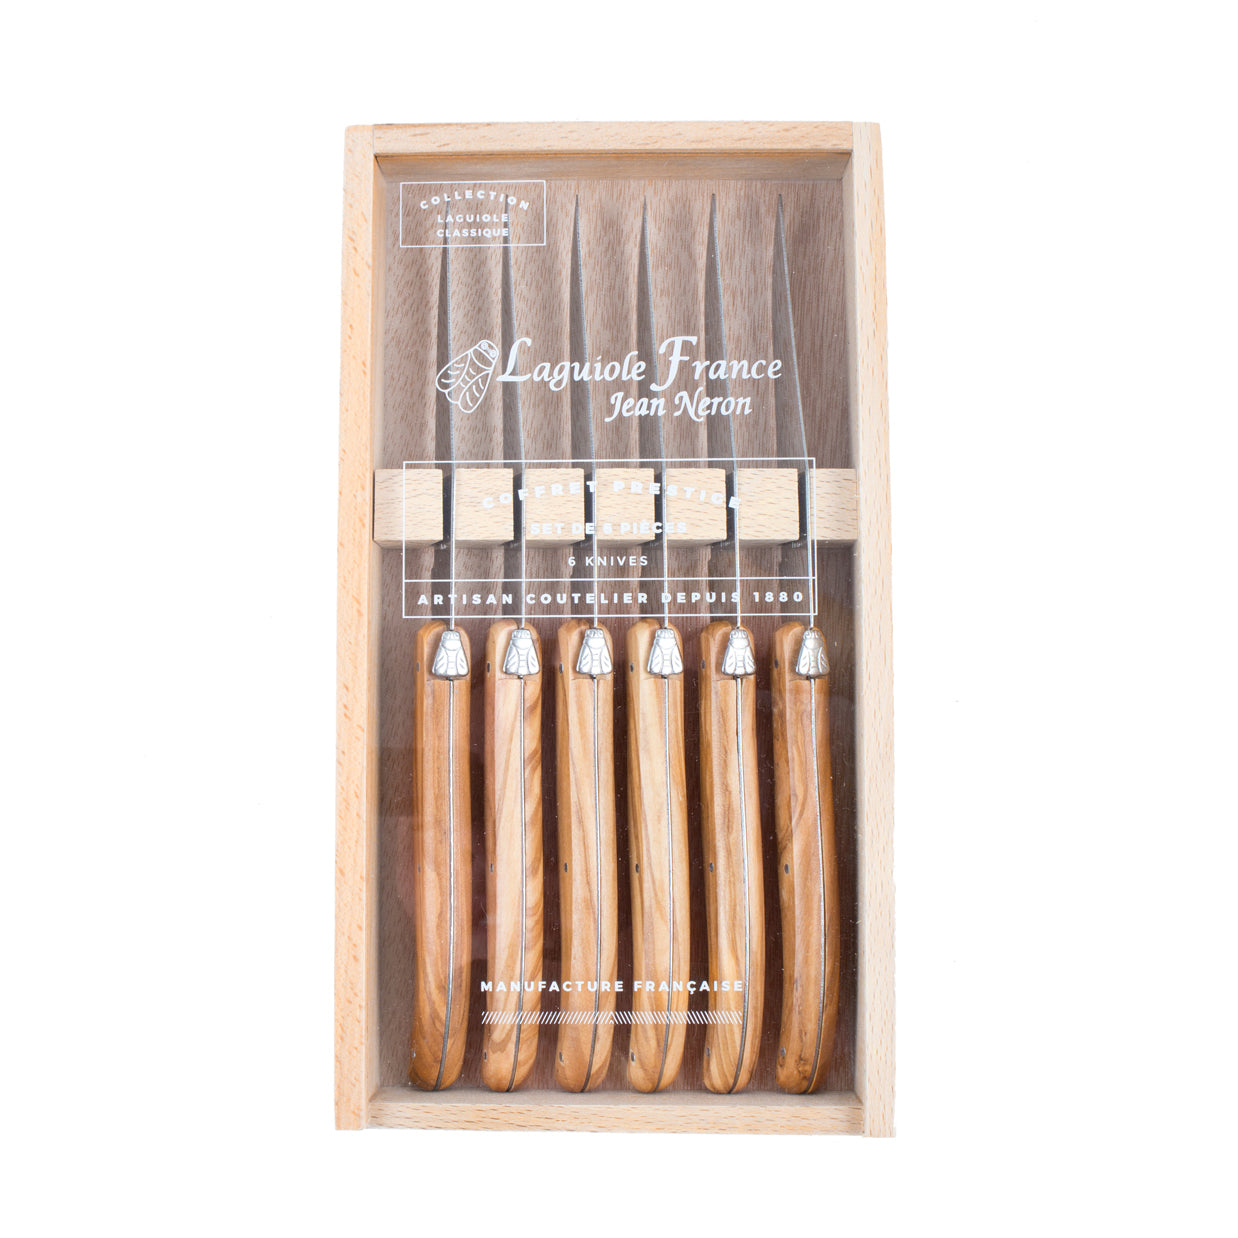 Laguiole Olivewood Knives in Wooden Box with Acrylic Lid (Set of 6) Cutlery Laguiole Brand_Laguiole Flatware Sets Kitchen_Dinnerware Kitchen_Kitchenware Laguiole 7900-60540M_OL_AL-Laguiole-Olivewood-Knives-in-Wooden-Box-with-Acrylic-Lid-Set-of-6_ef95315c-984d-4349-a200-ec21e187f7b7